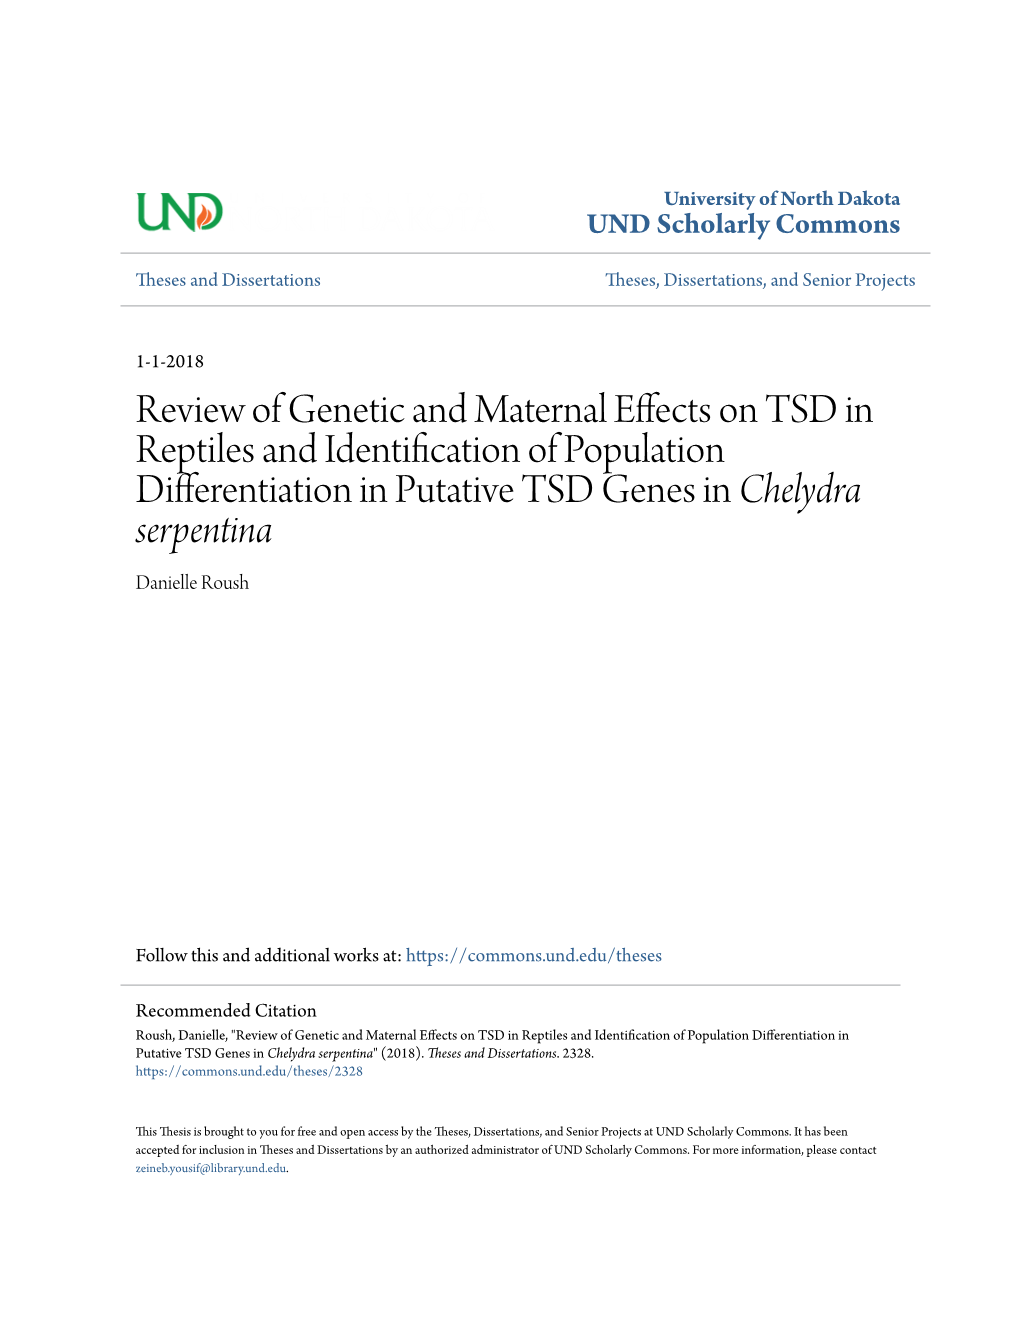 Review of Genetic and Maternal Effects on TSD in Reptiles and Identification of Population Differentiation in Putative TSD Genes in Chelydra Serpentina Danielle Roush